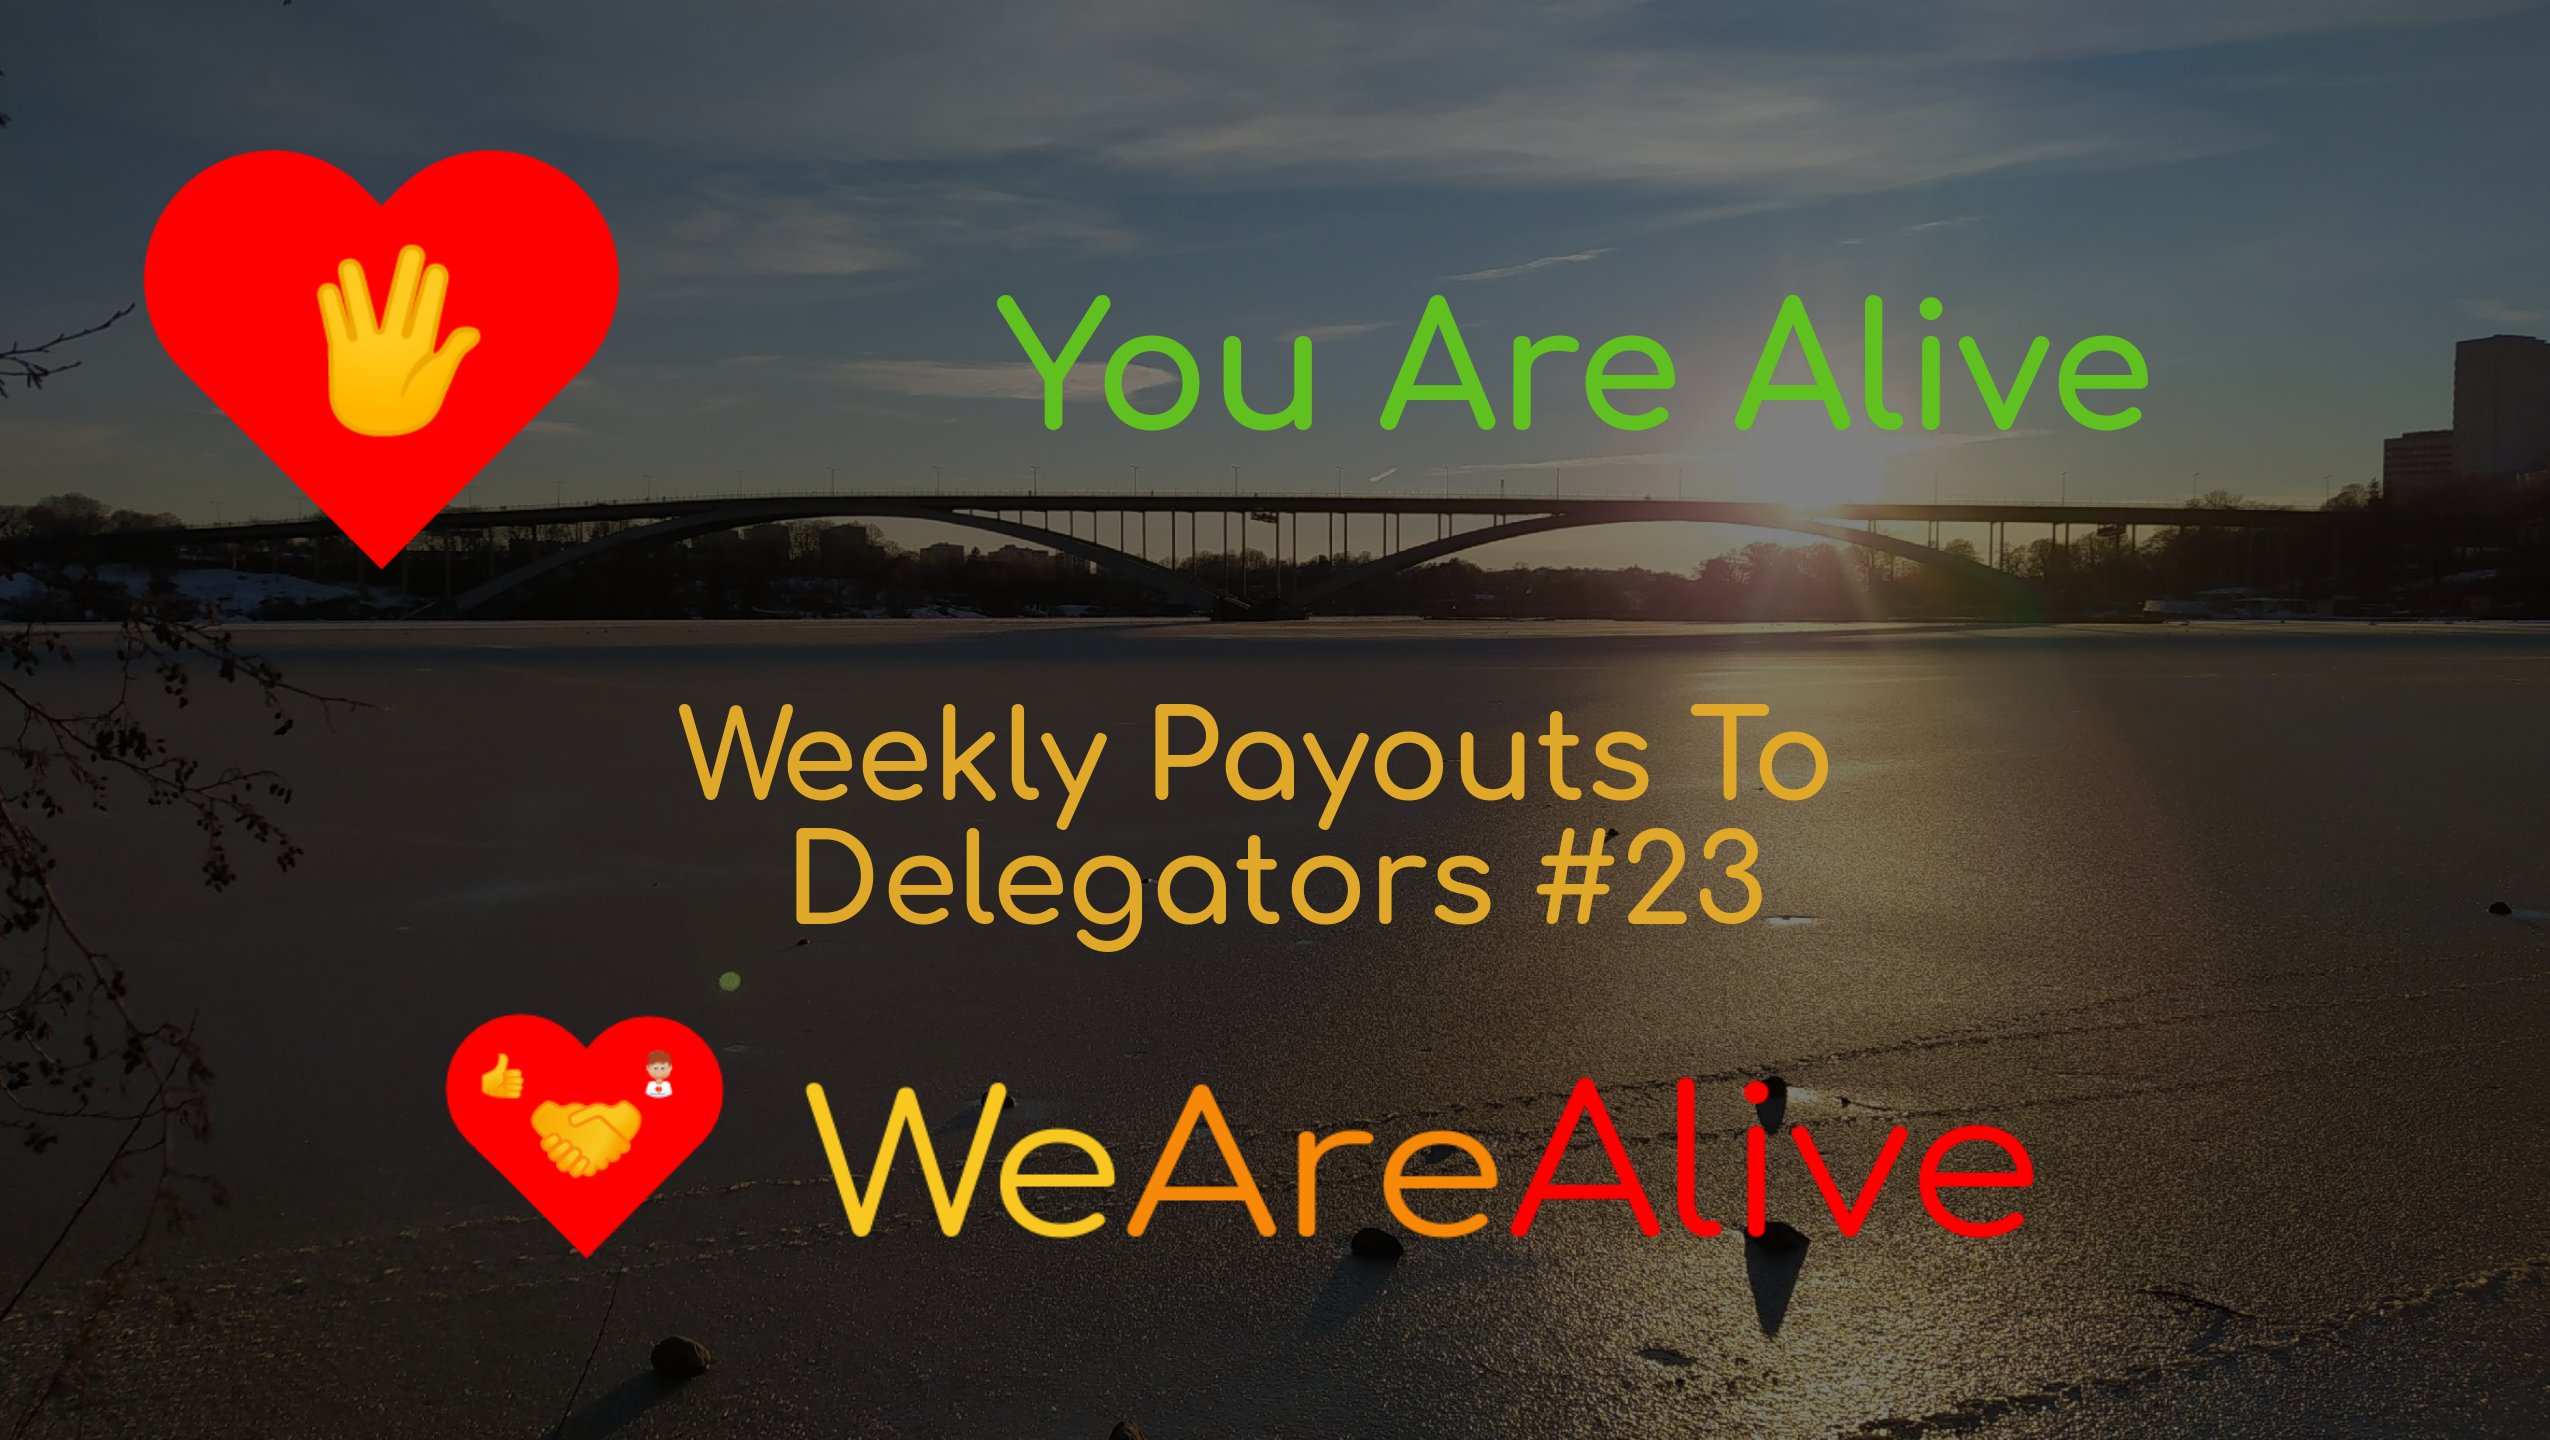 @youarealive/you-are-alive-weekly-payouts-to-hp-delegators-23